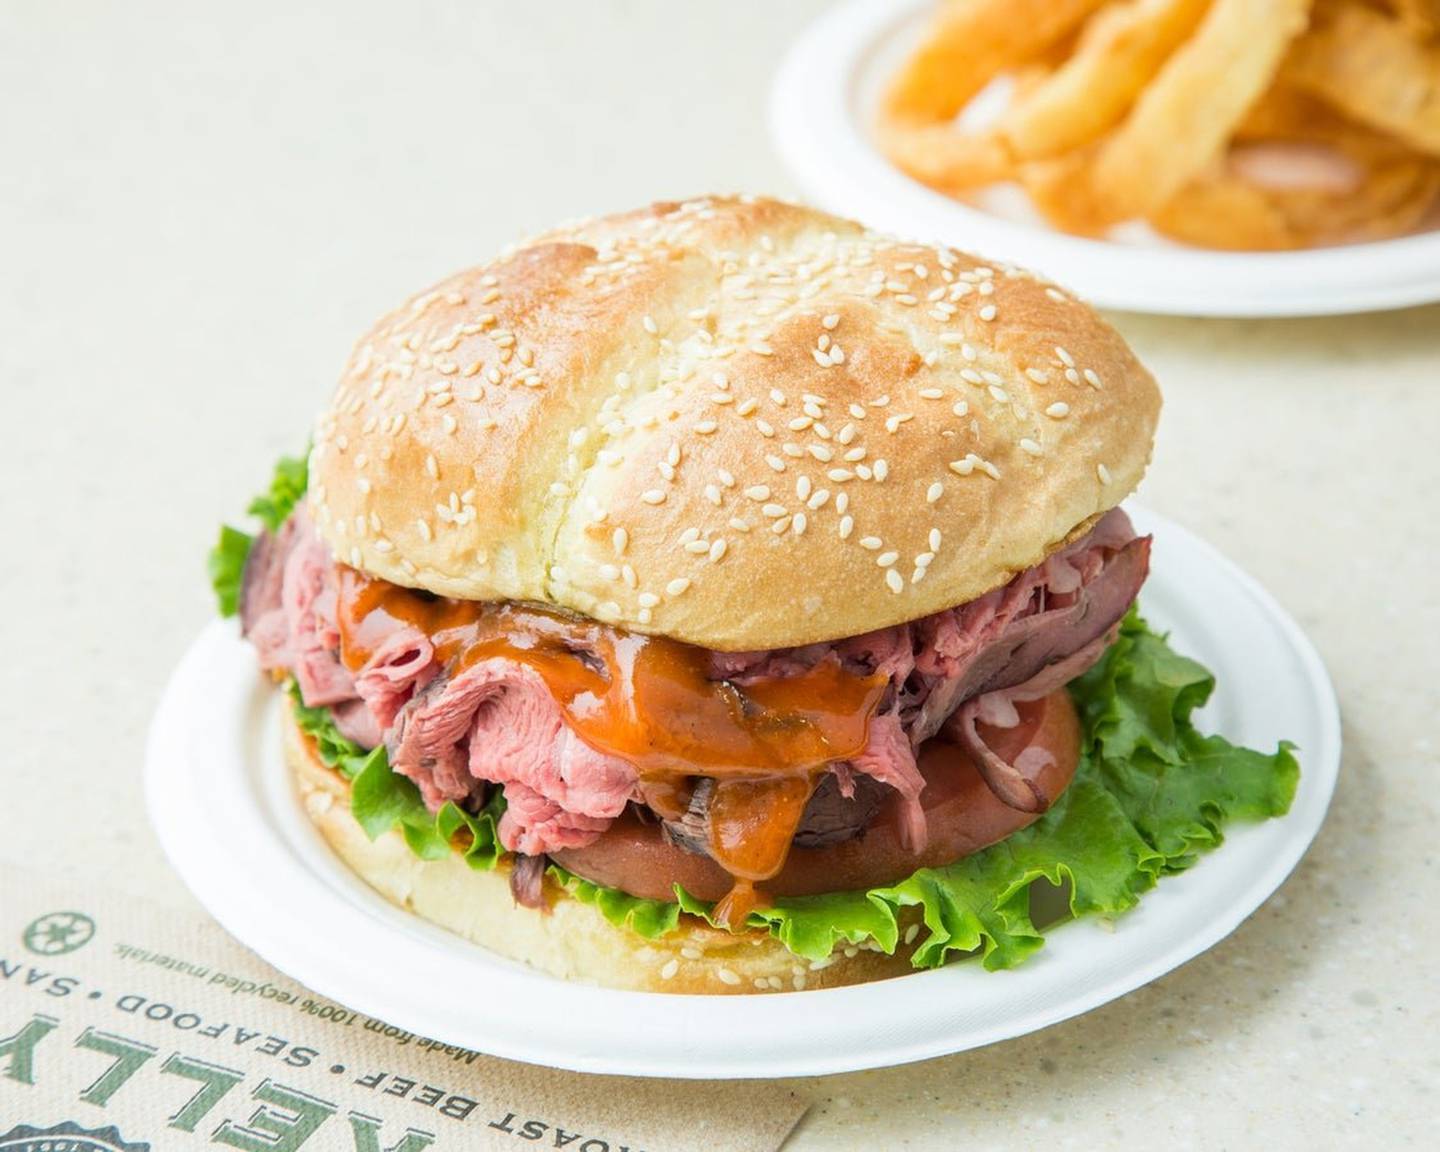 Kelly's signature item, the roast beef sandwich, is made with rare, slow-roasted beef, mayonnaise, barbecue sauce and American cheese.